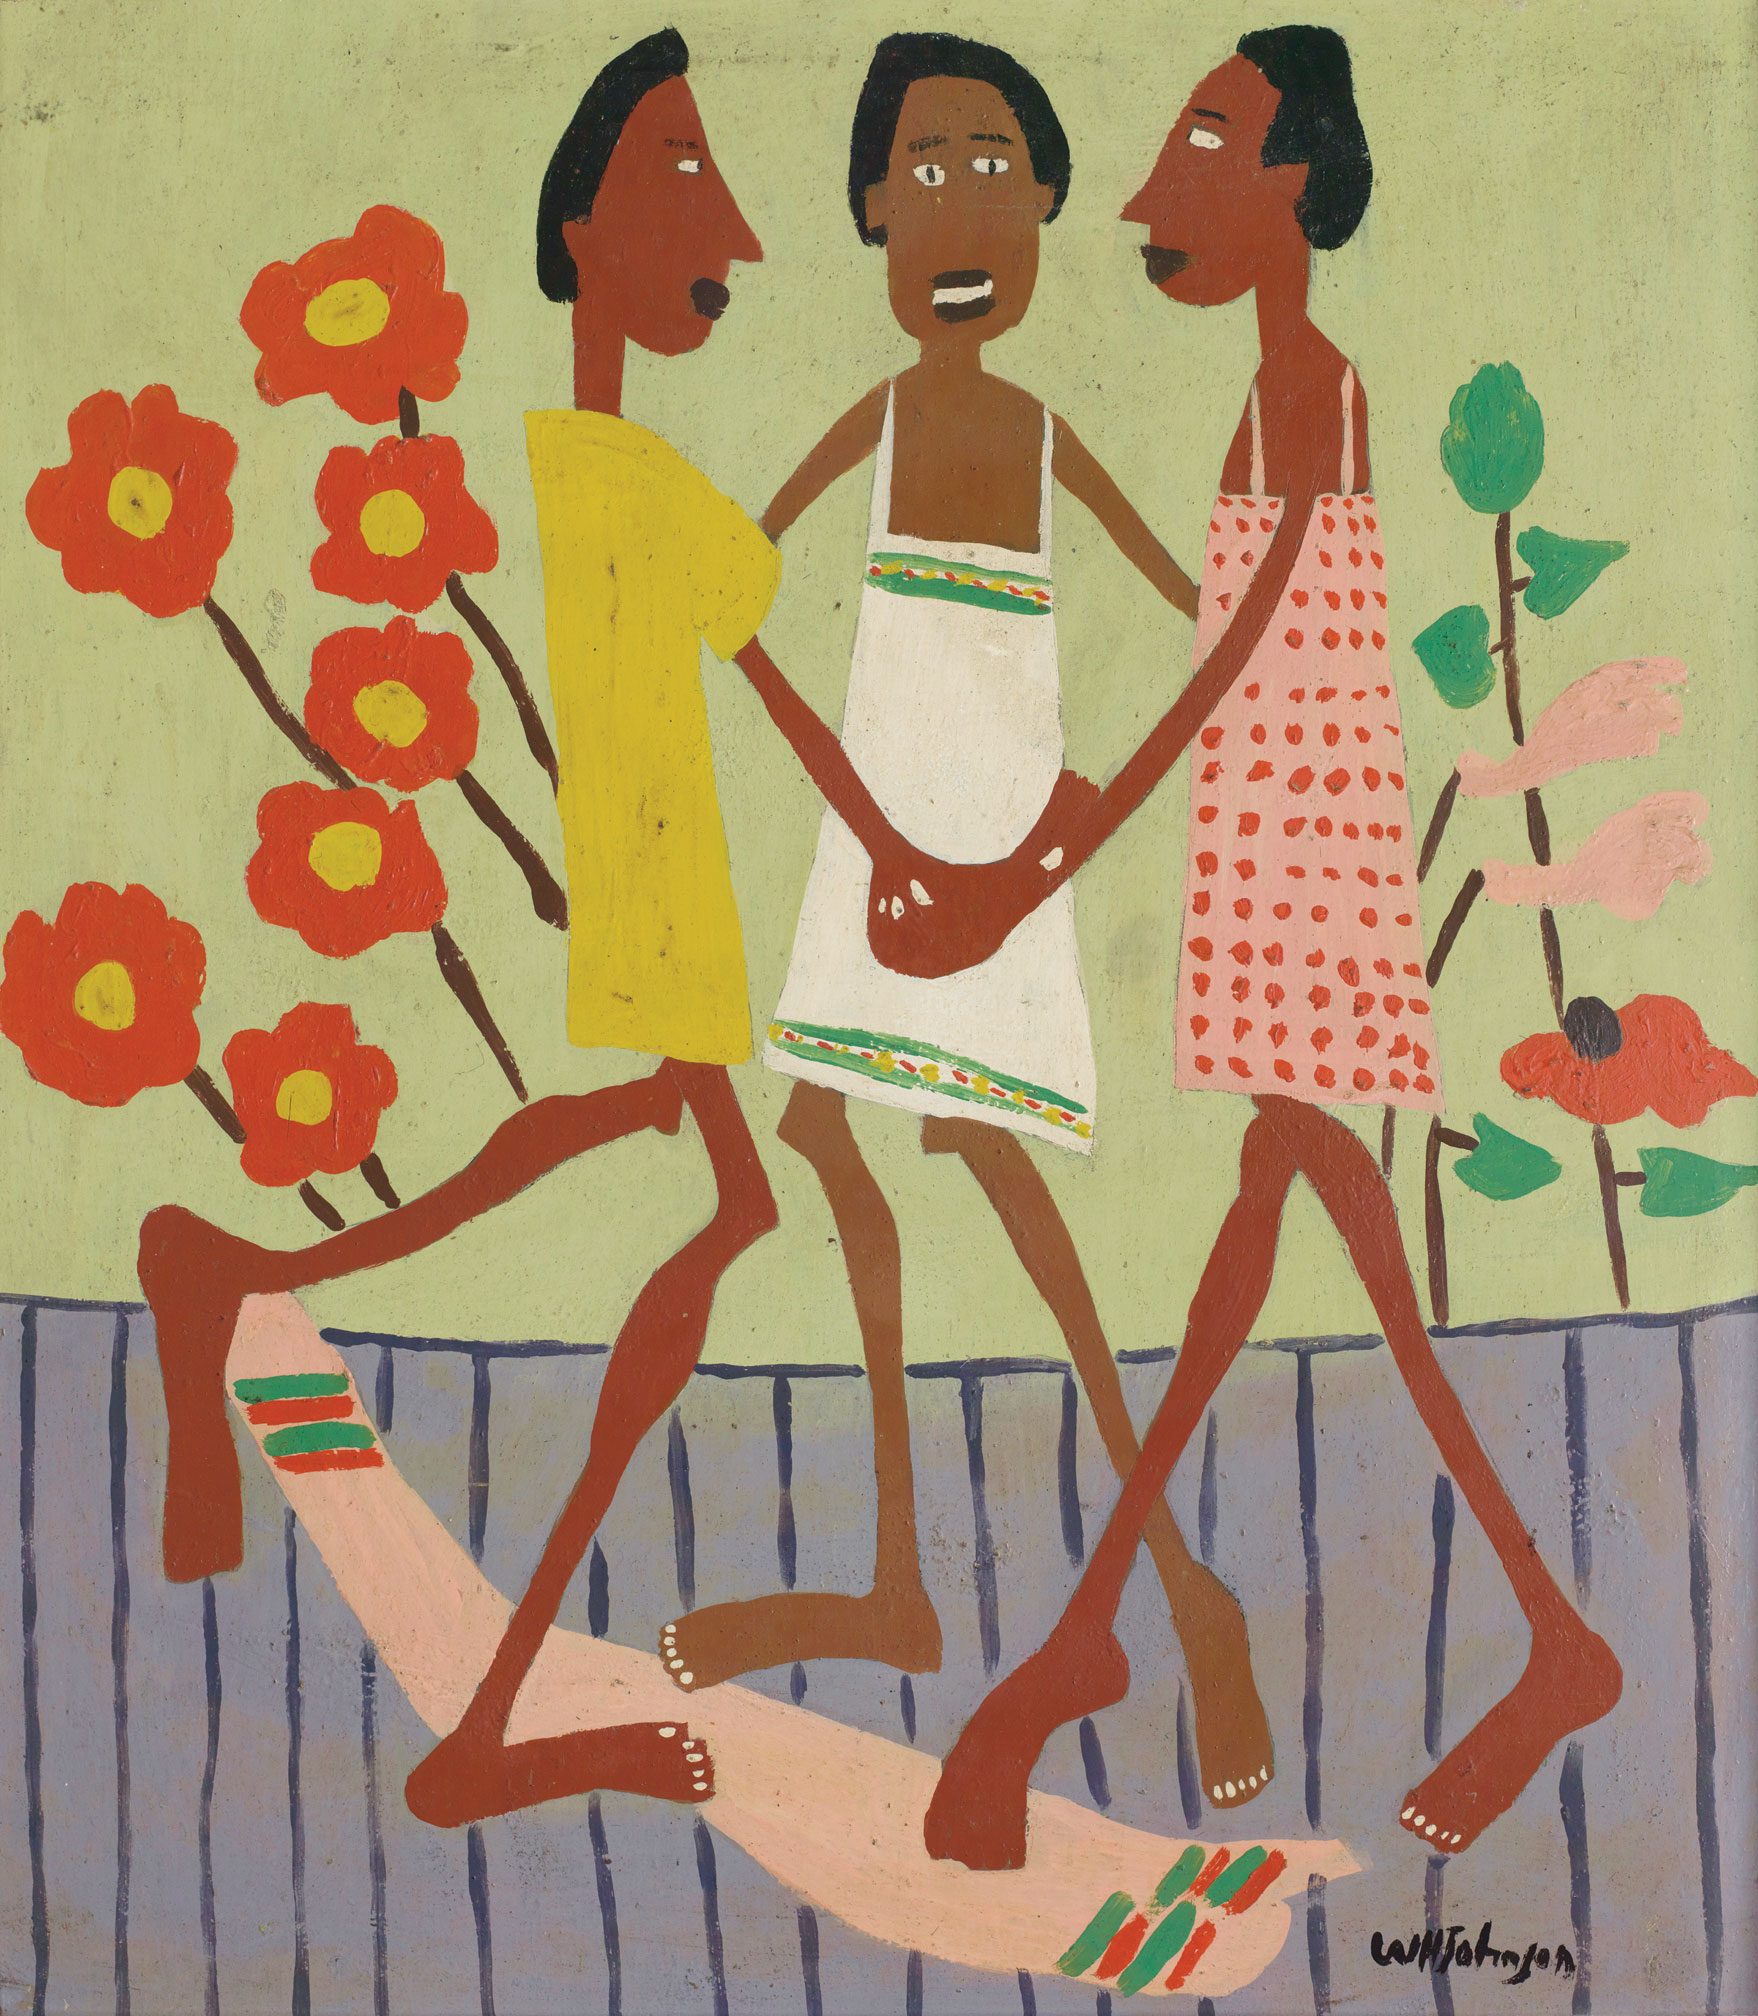 10 Greatest harlem renaissance for kids You Can Use It Free - ArtXPaint ...